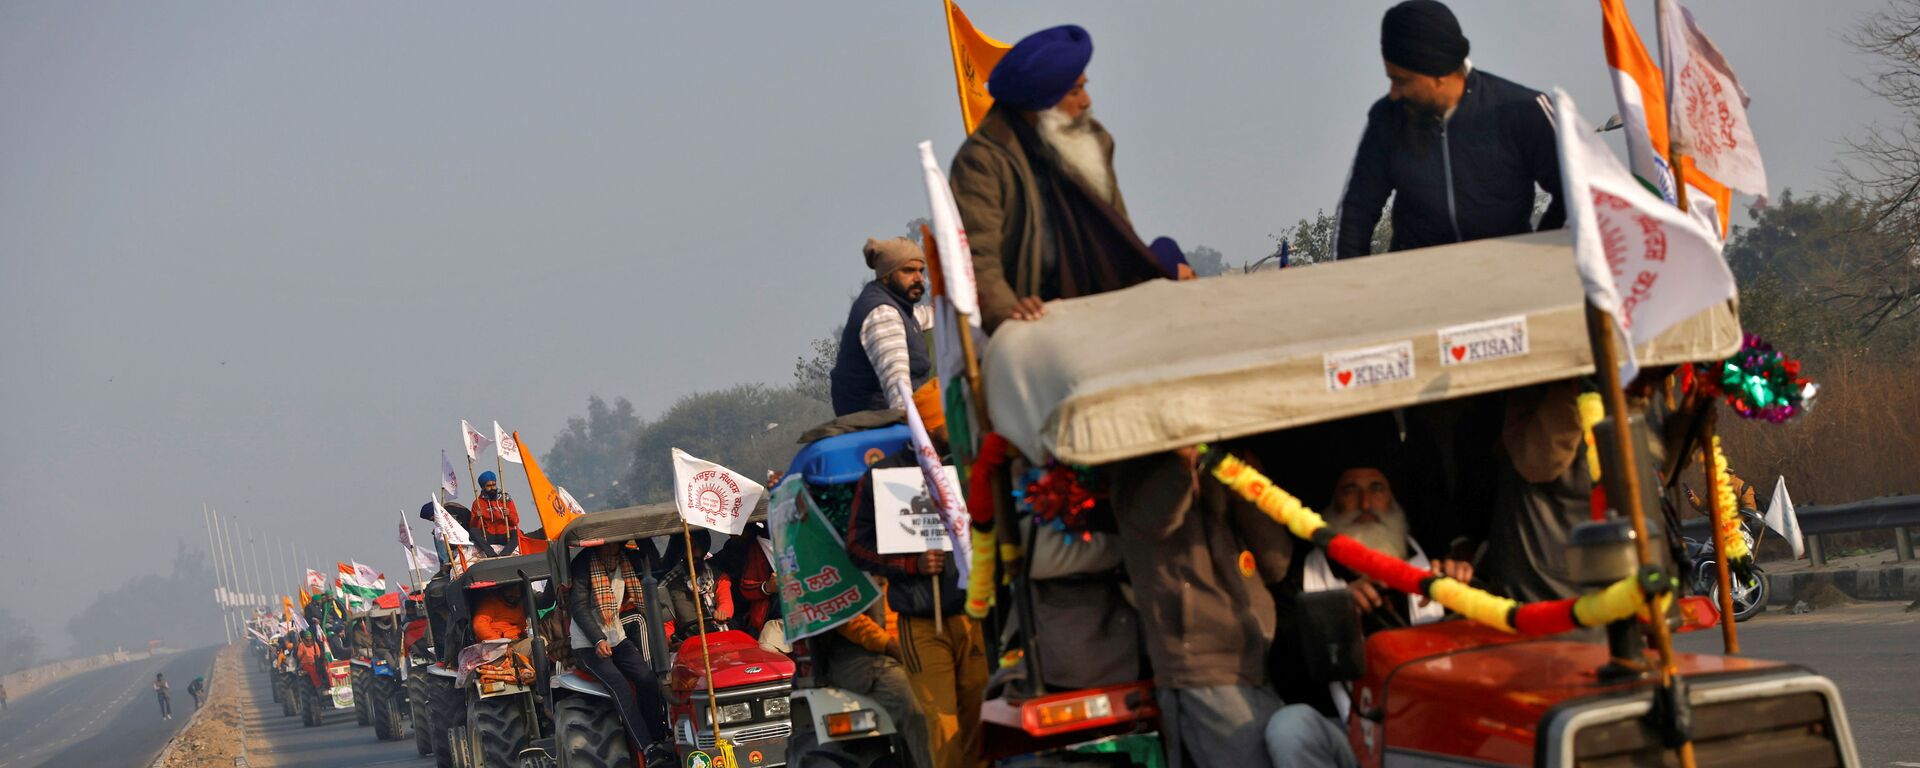 Farmers take part in a tractor rally to protest against farm laws on the occasion of India's Republic Day in Delhi, India, January 26, 2021 - Sputnik International, 1920, 27.02.2021